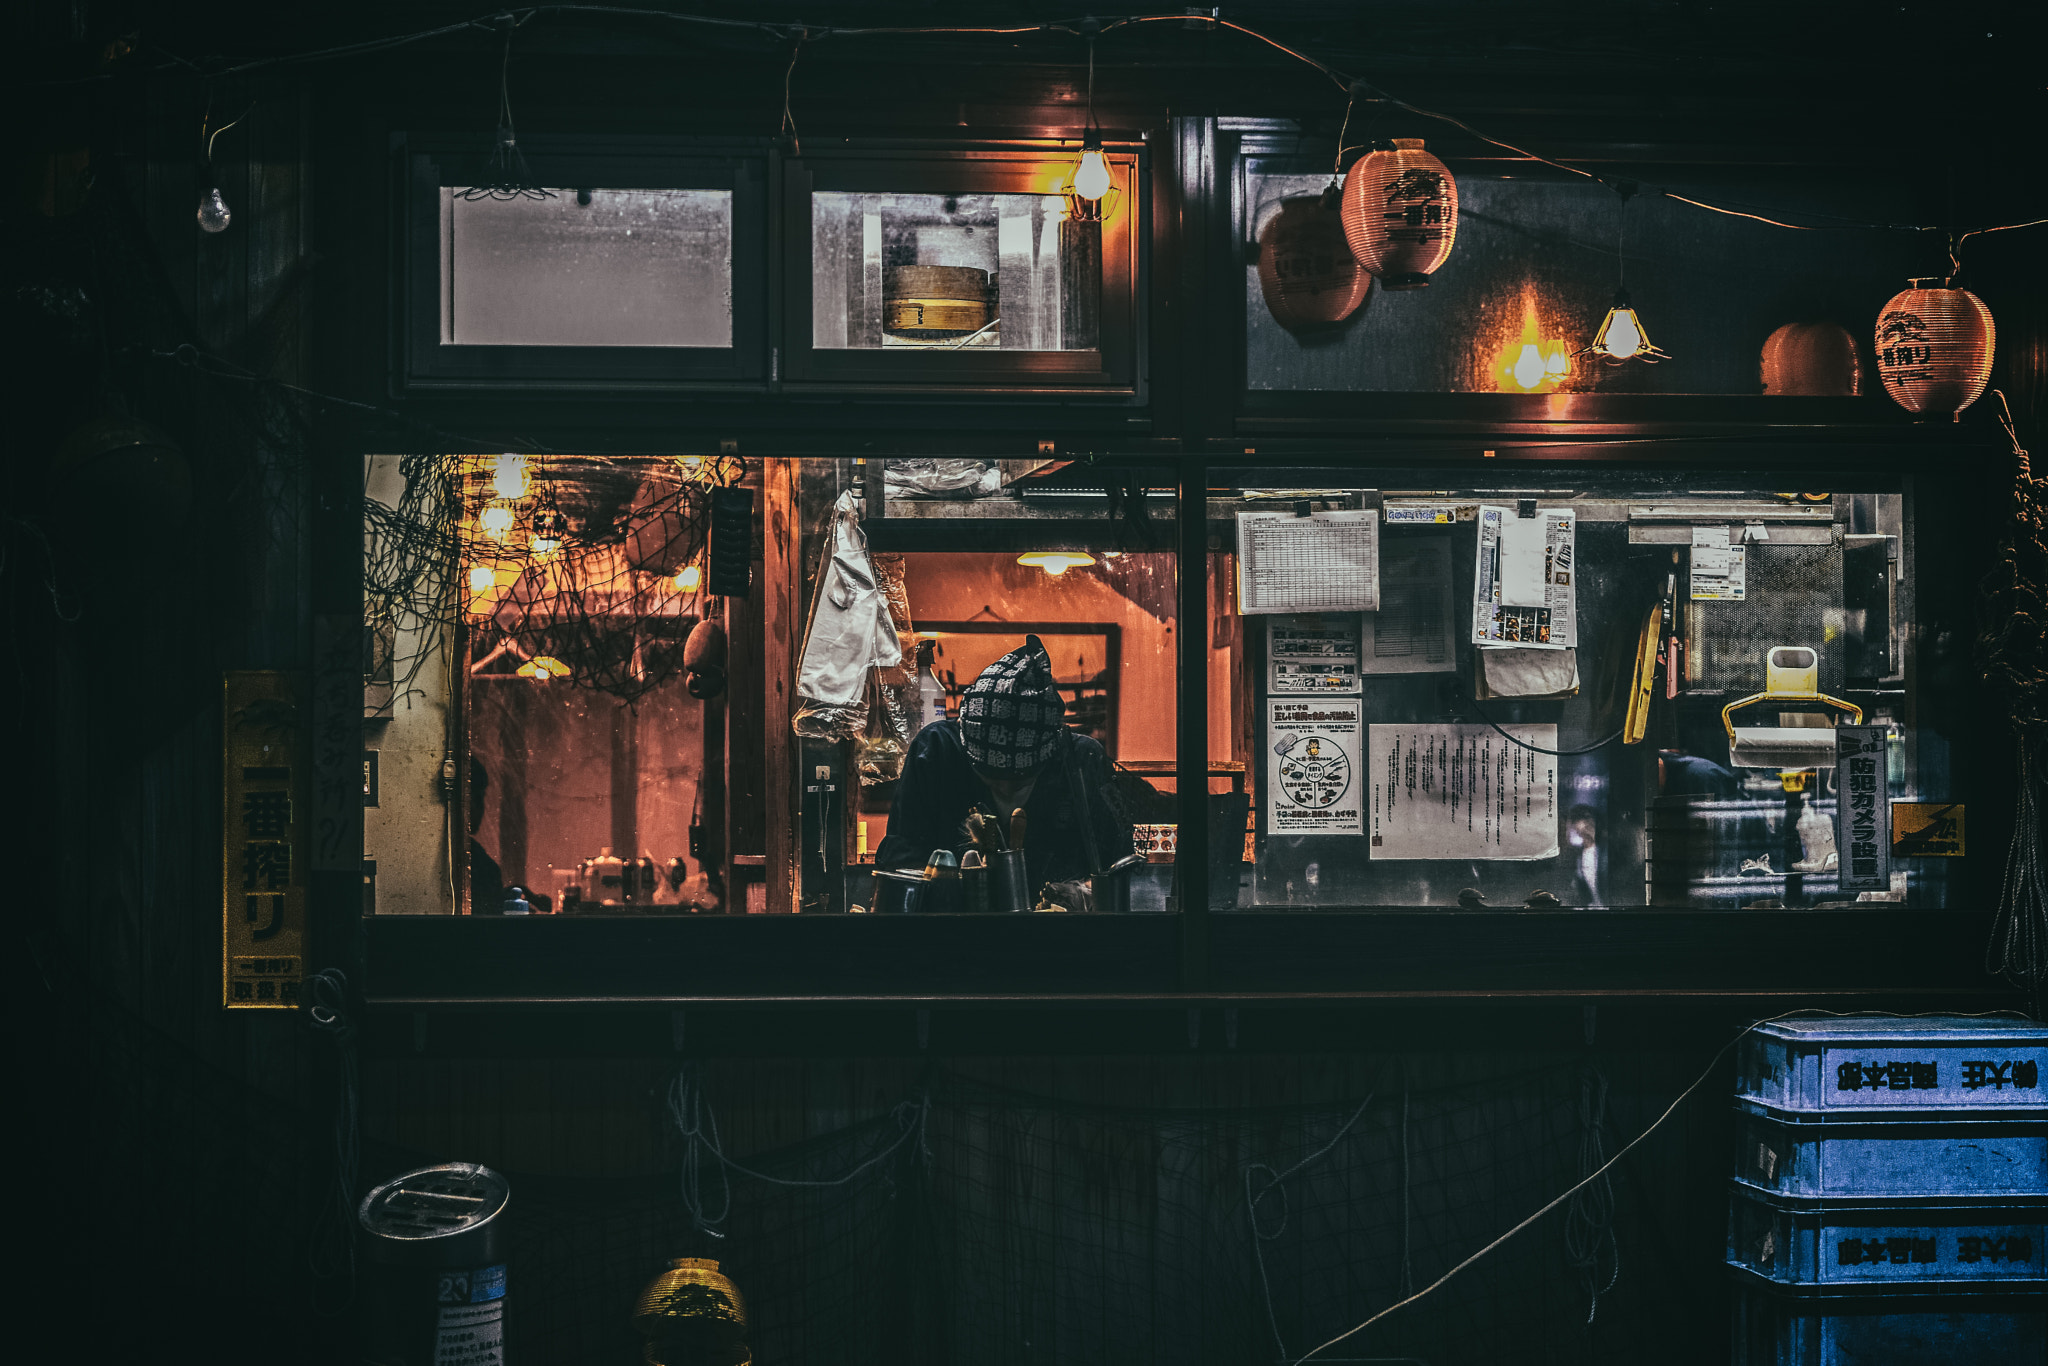 Sony a7 II sample photo. Kitchen in a japanese pub photography